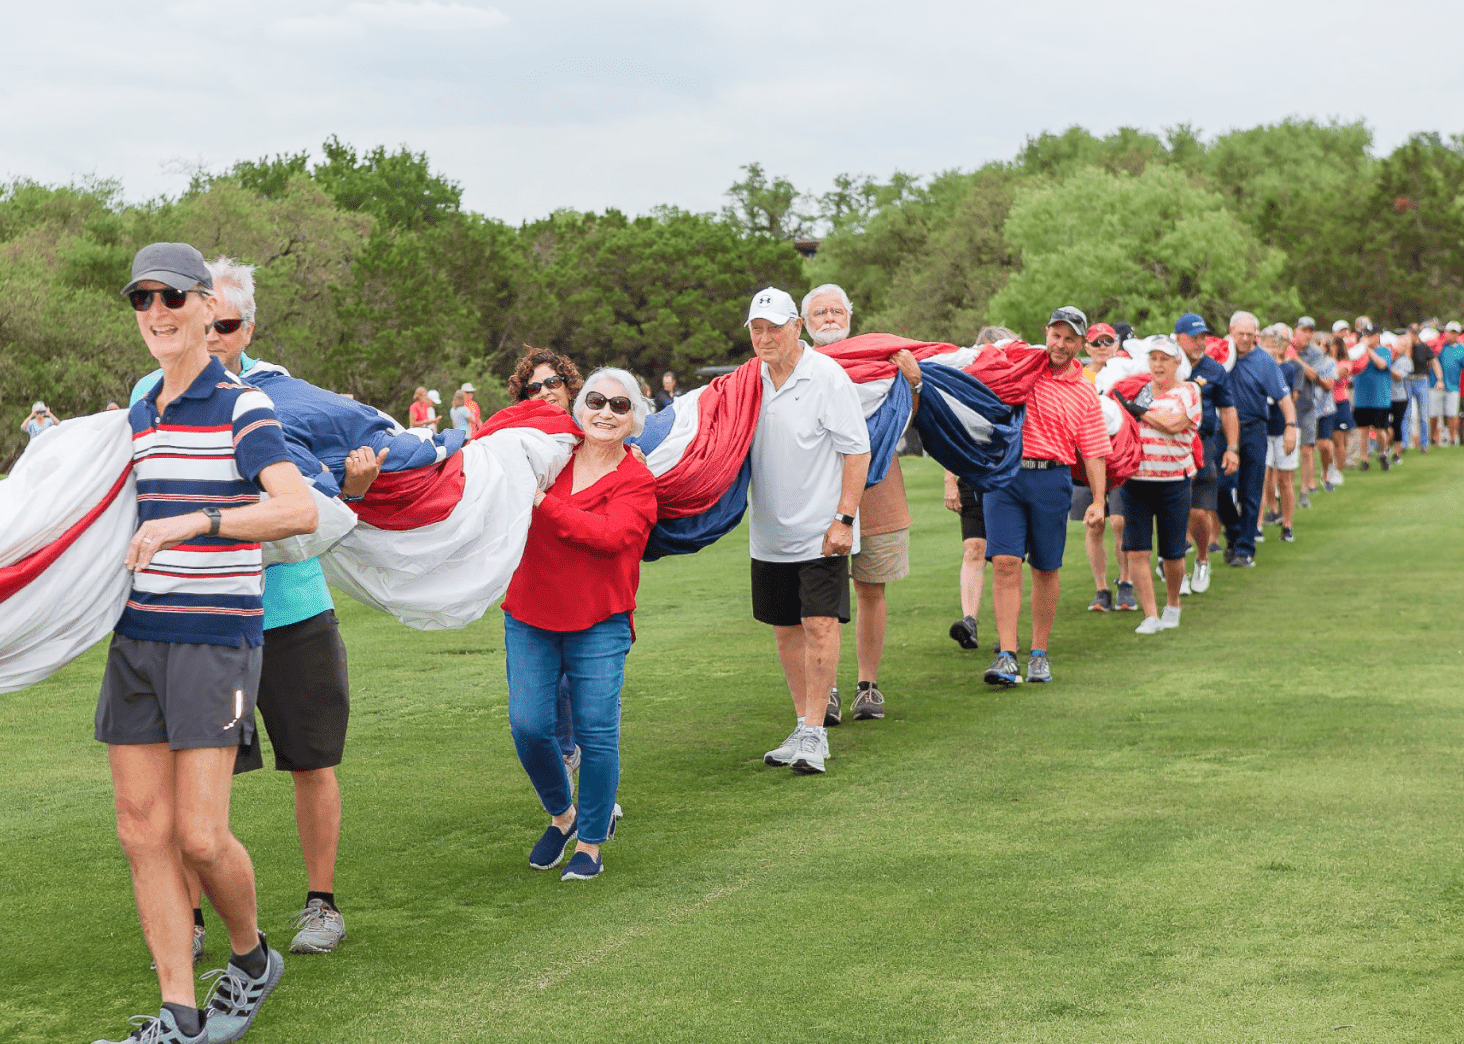 Residents Carrying Large US Flag Together